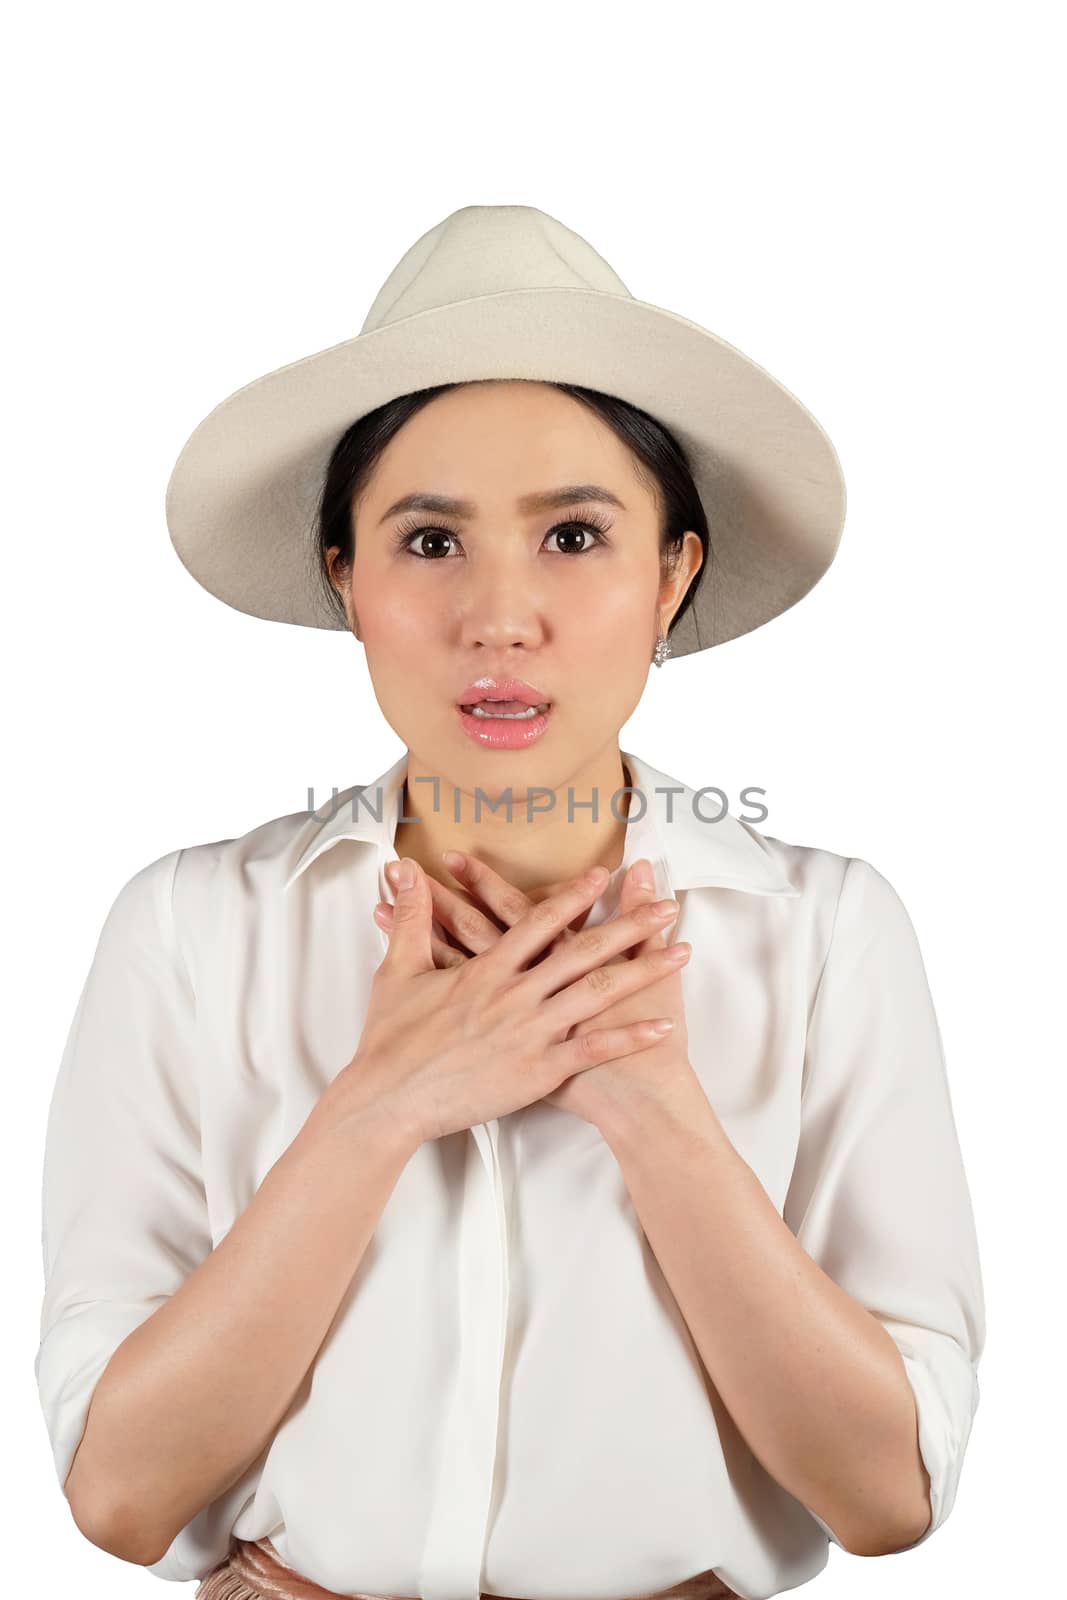 Shocked woman wearing stylish hat looking at camera and white background with clipping path